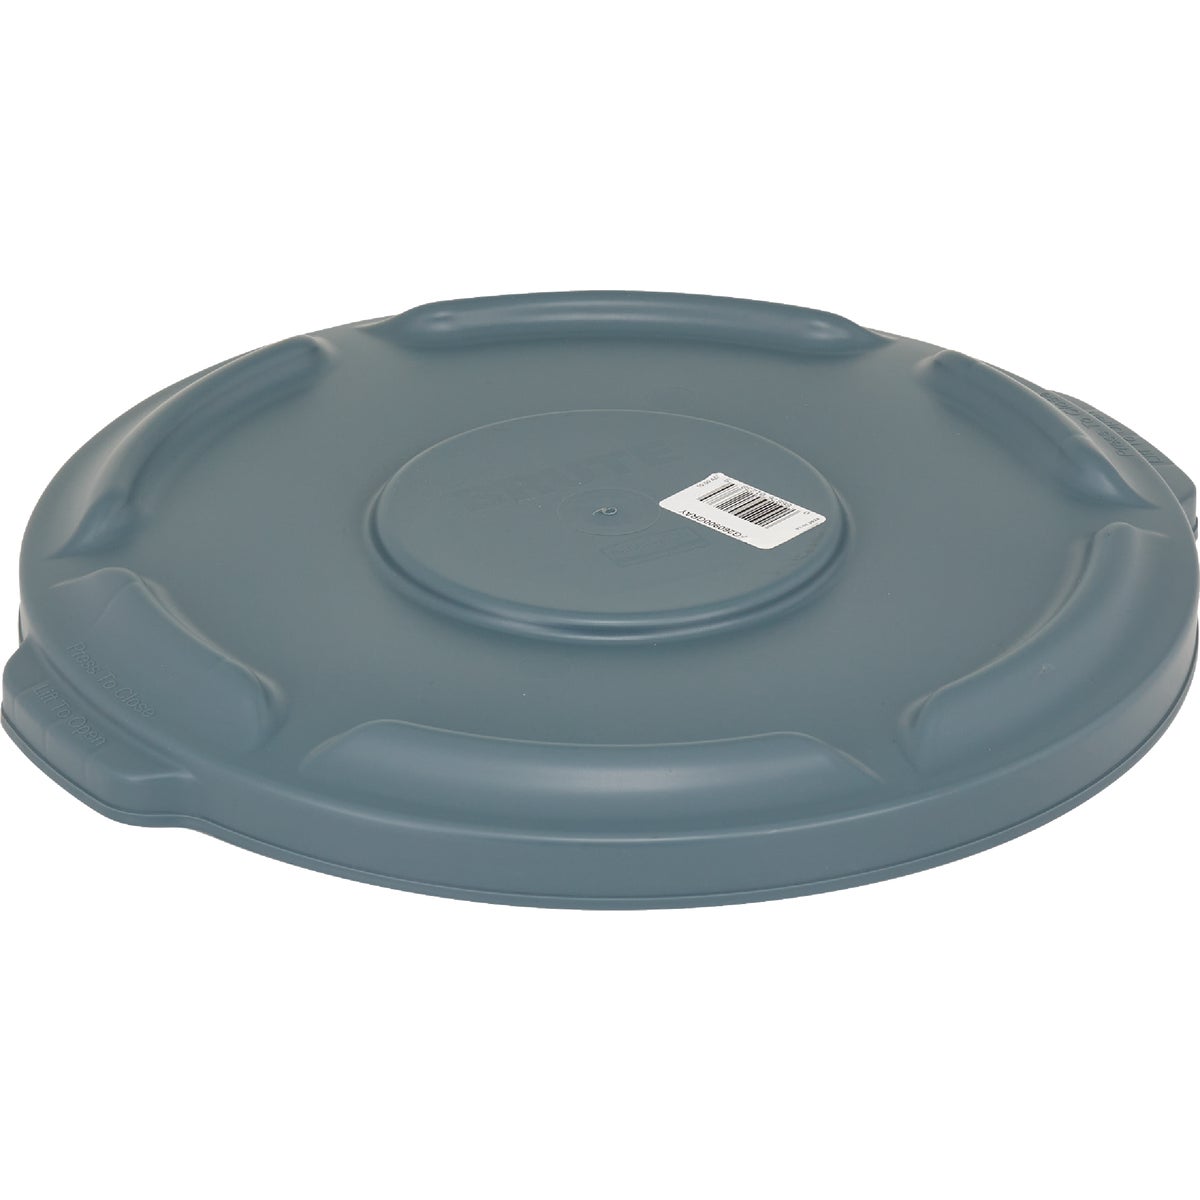 Rubbermaid Commercial Brute Gray Trash Can Lid for 10 Gal. Trash Can